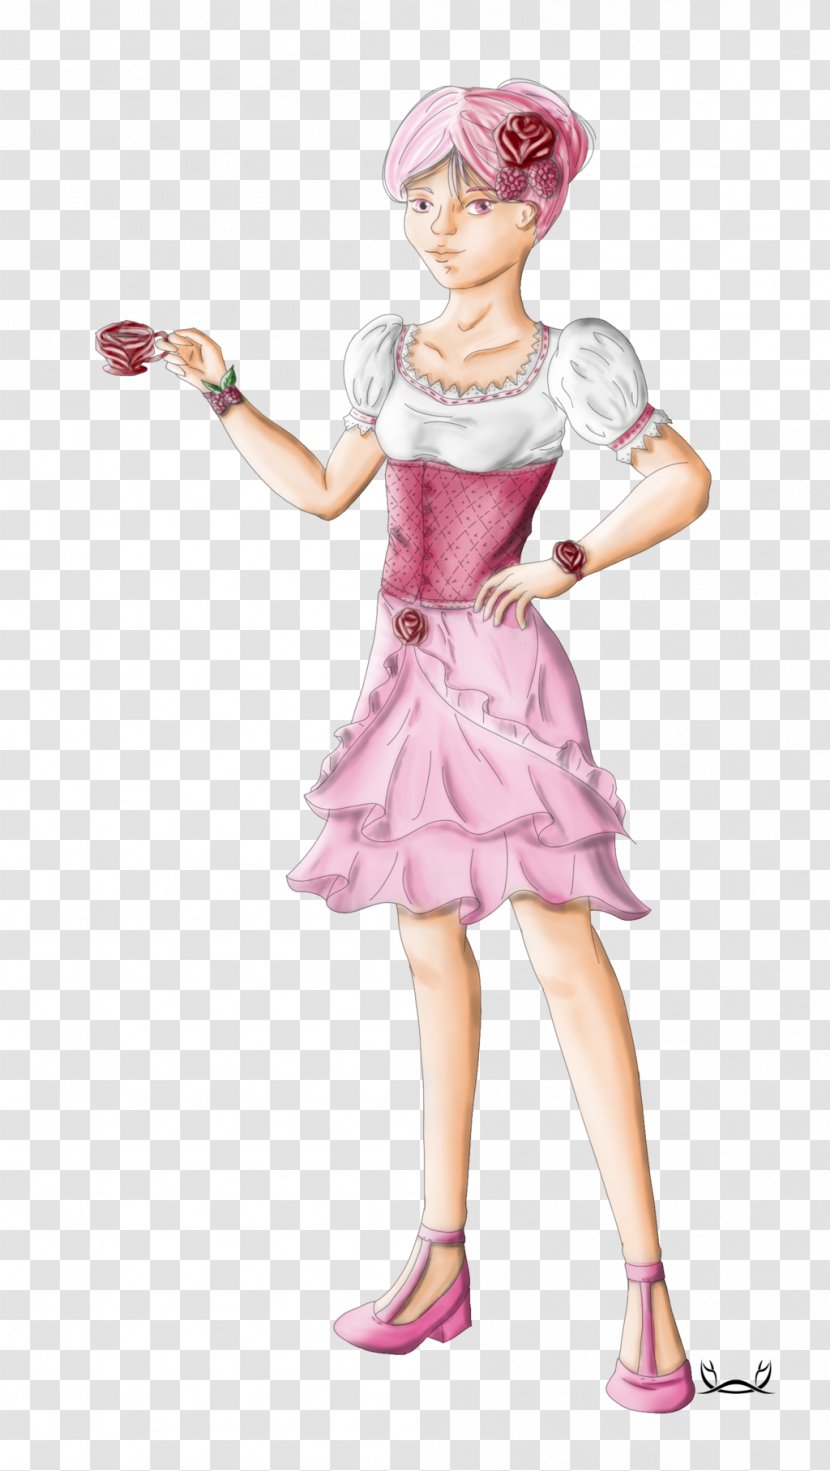 Costume Design Character Fiction - Lychee Tea Transparent PNG